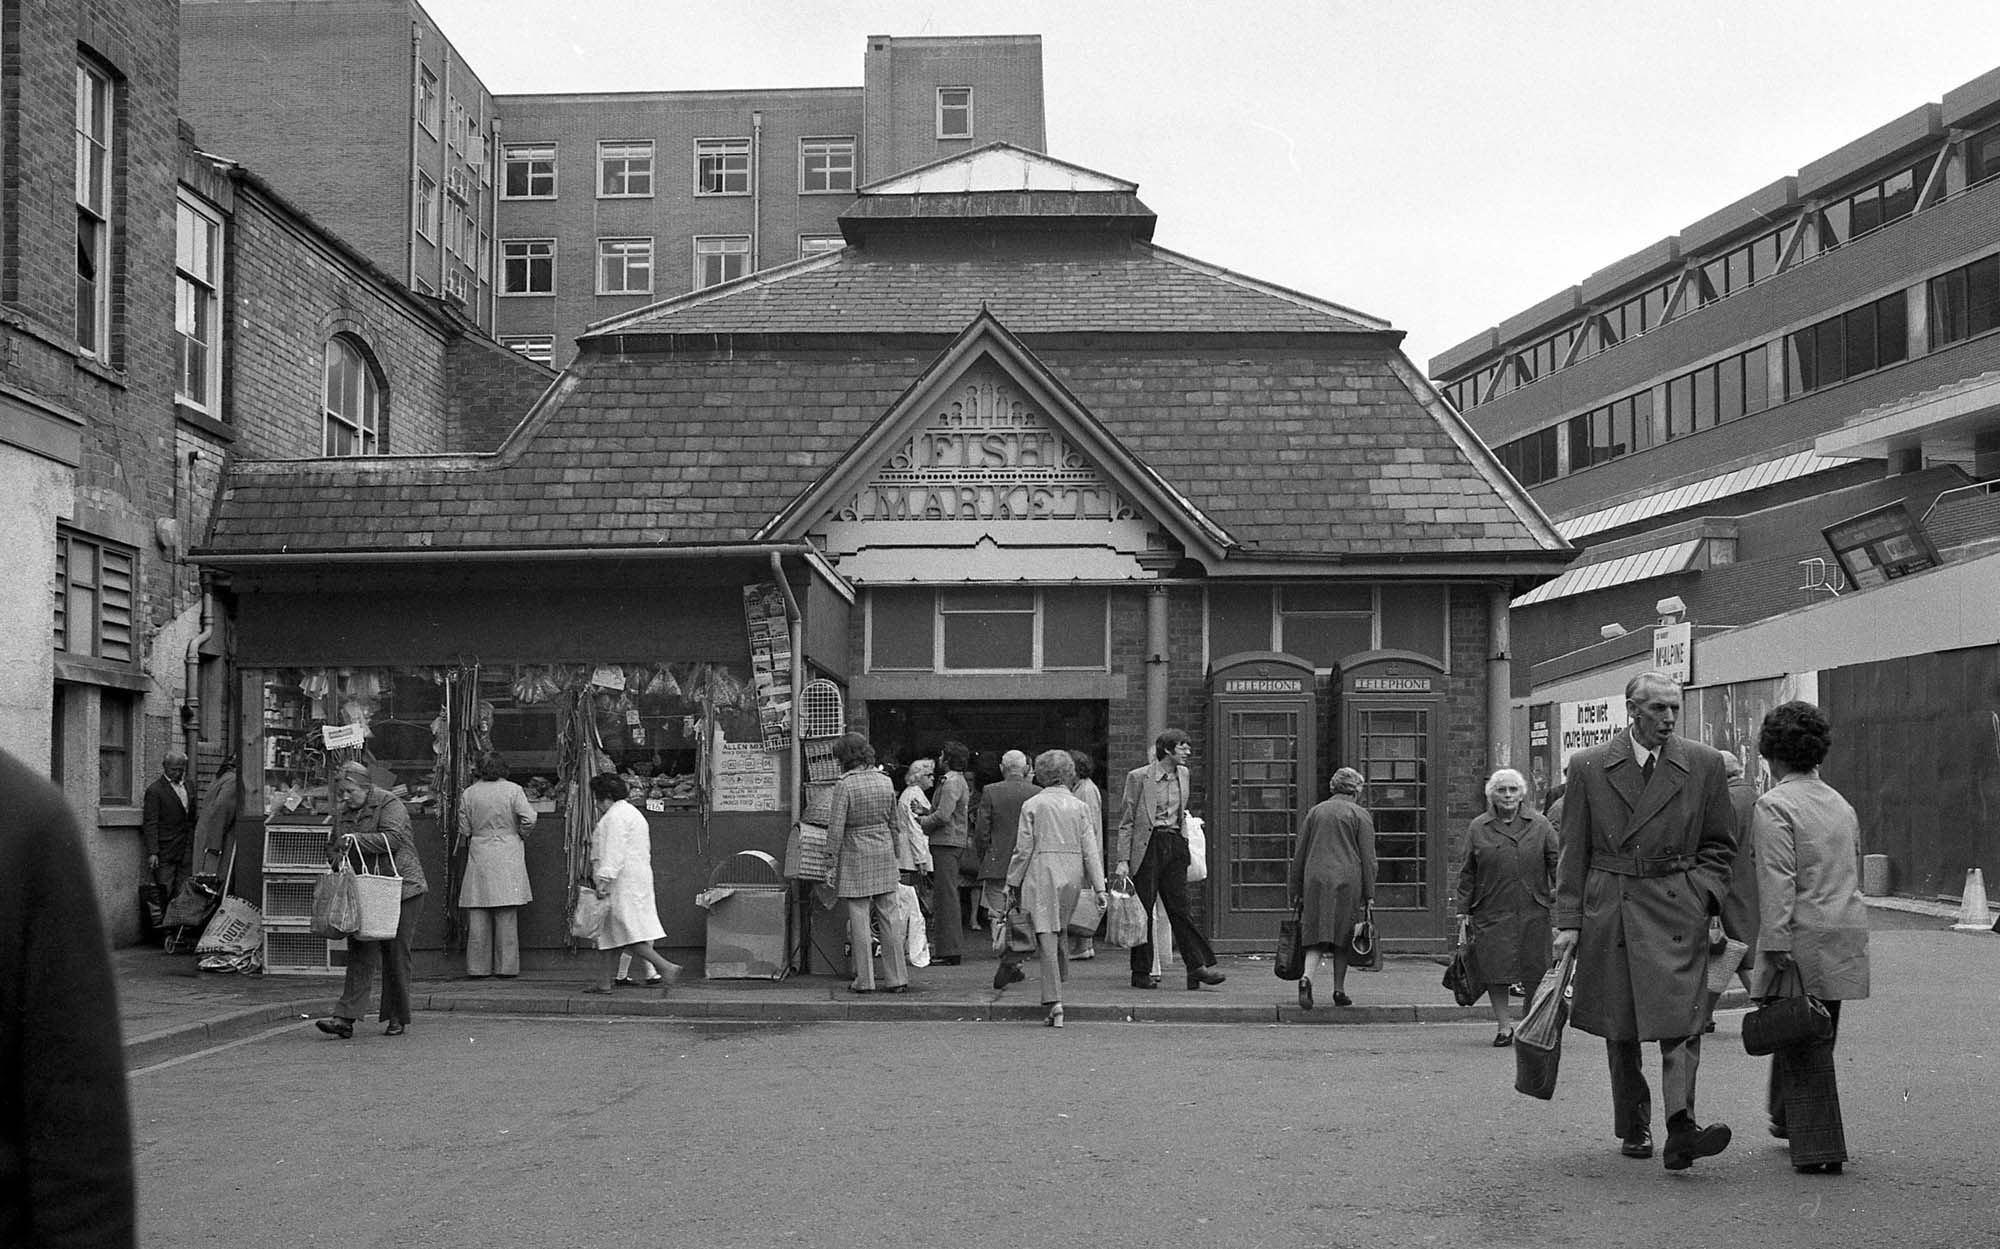 The old Fish Market before it was tuned into various shop units, 1970 - 